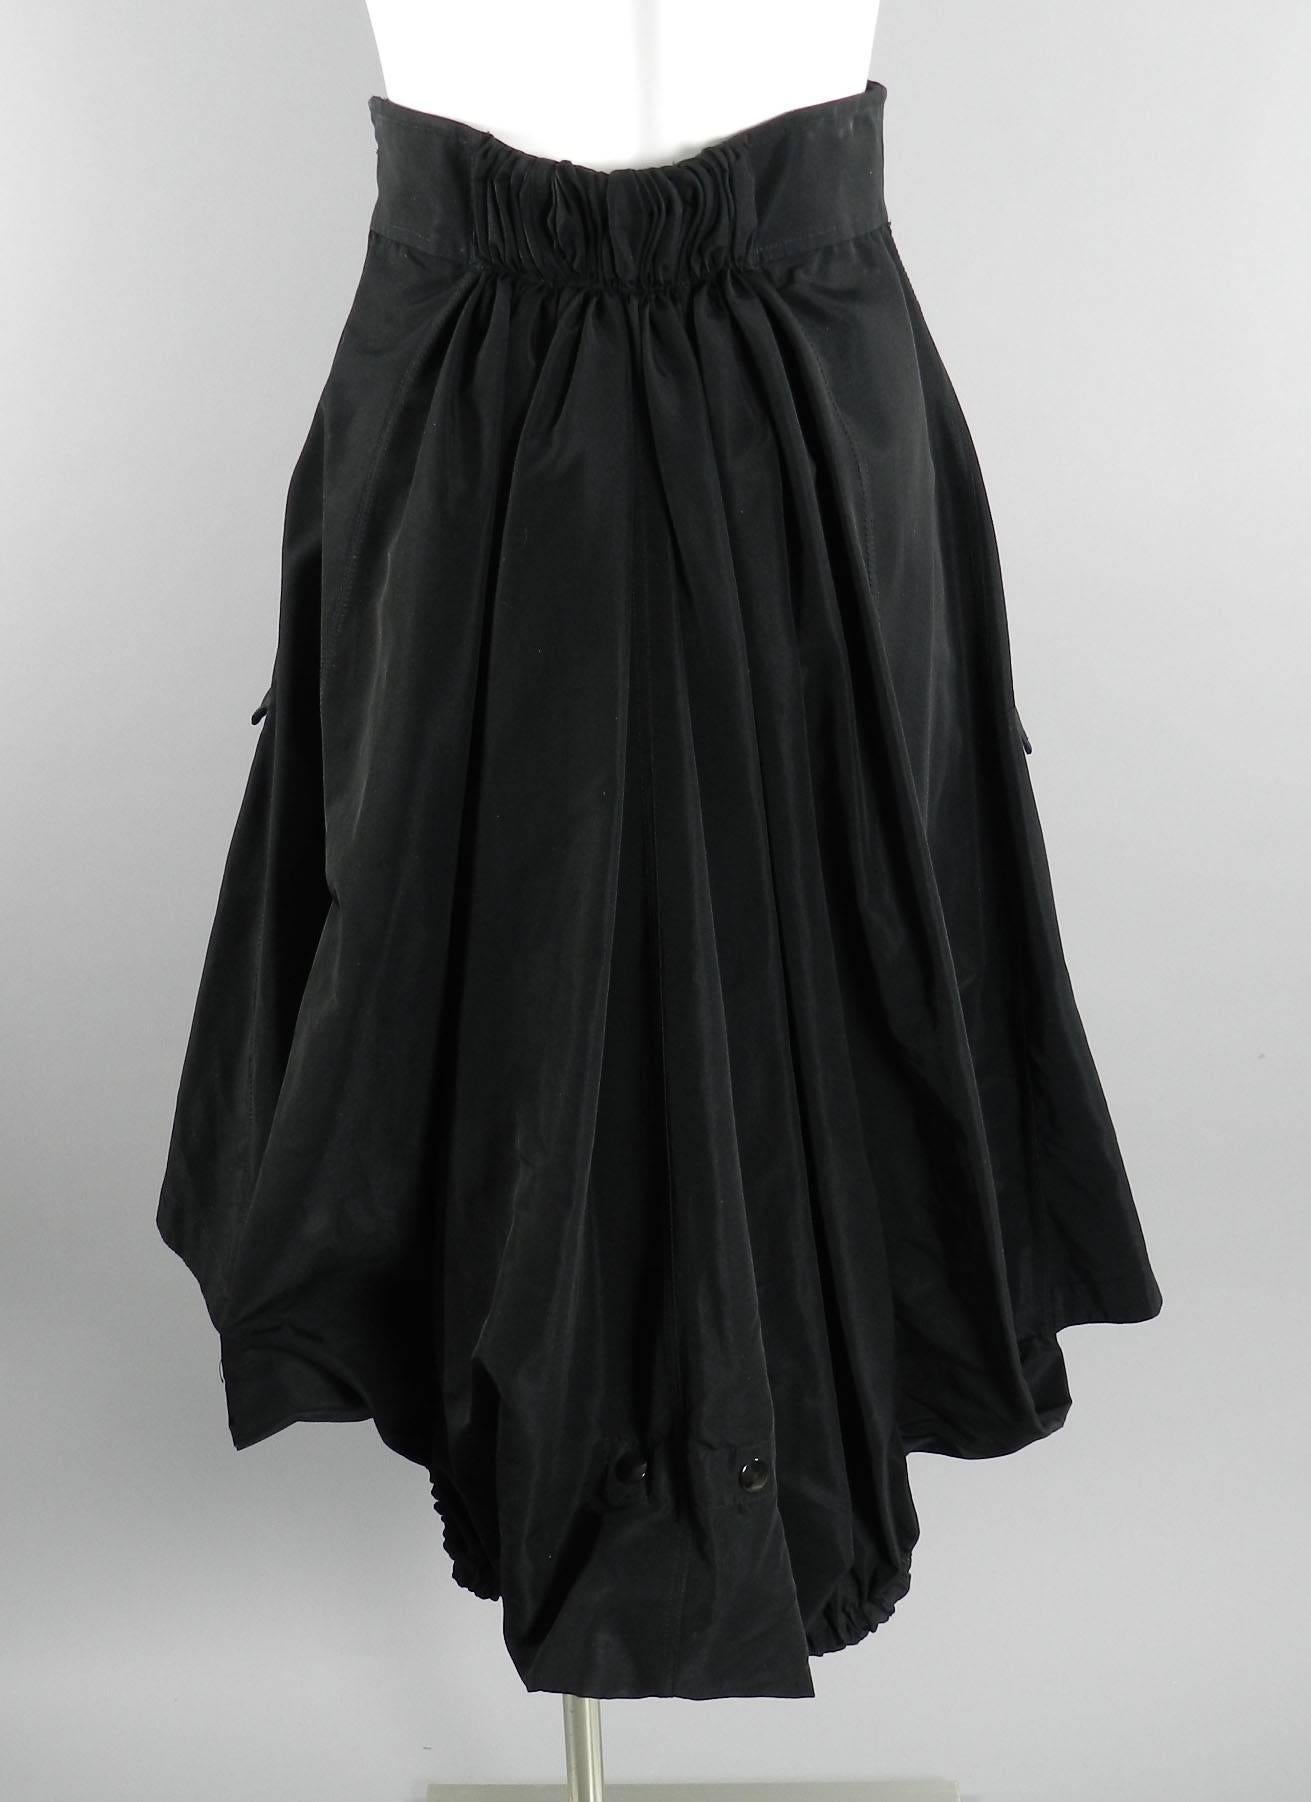 Jean Paul Gaultier Femme black skirt. High waist design with gathered back, buckle at front waist, side metal zipper, and 2 side pockets. Tagged size IT 40  To fit up to 26